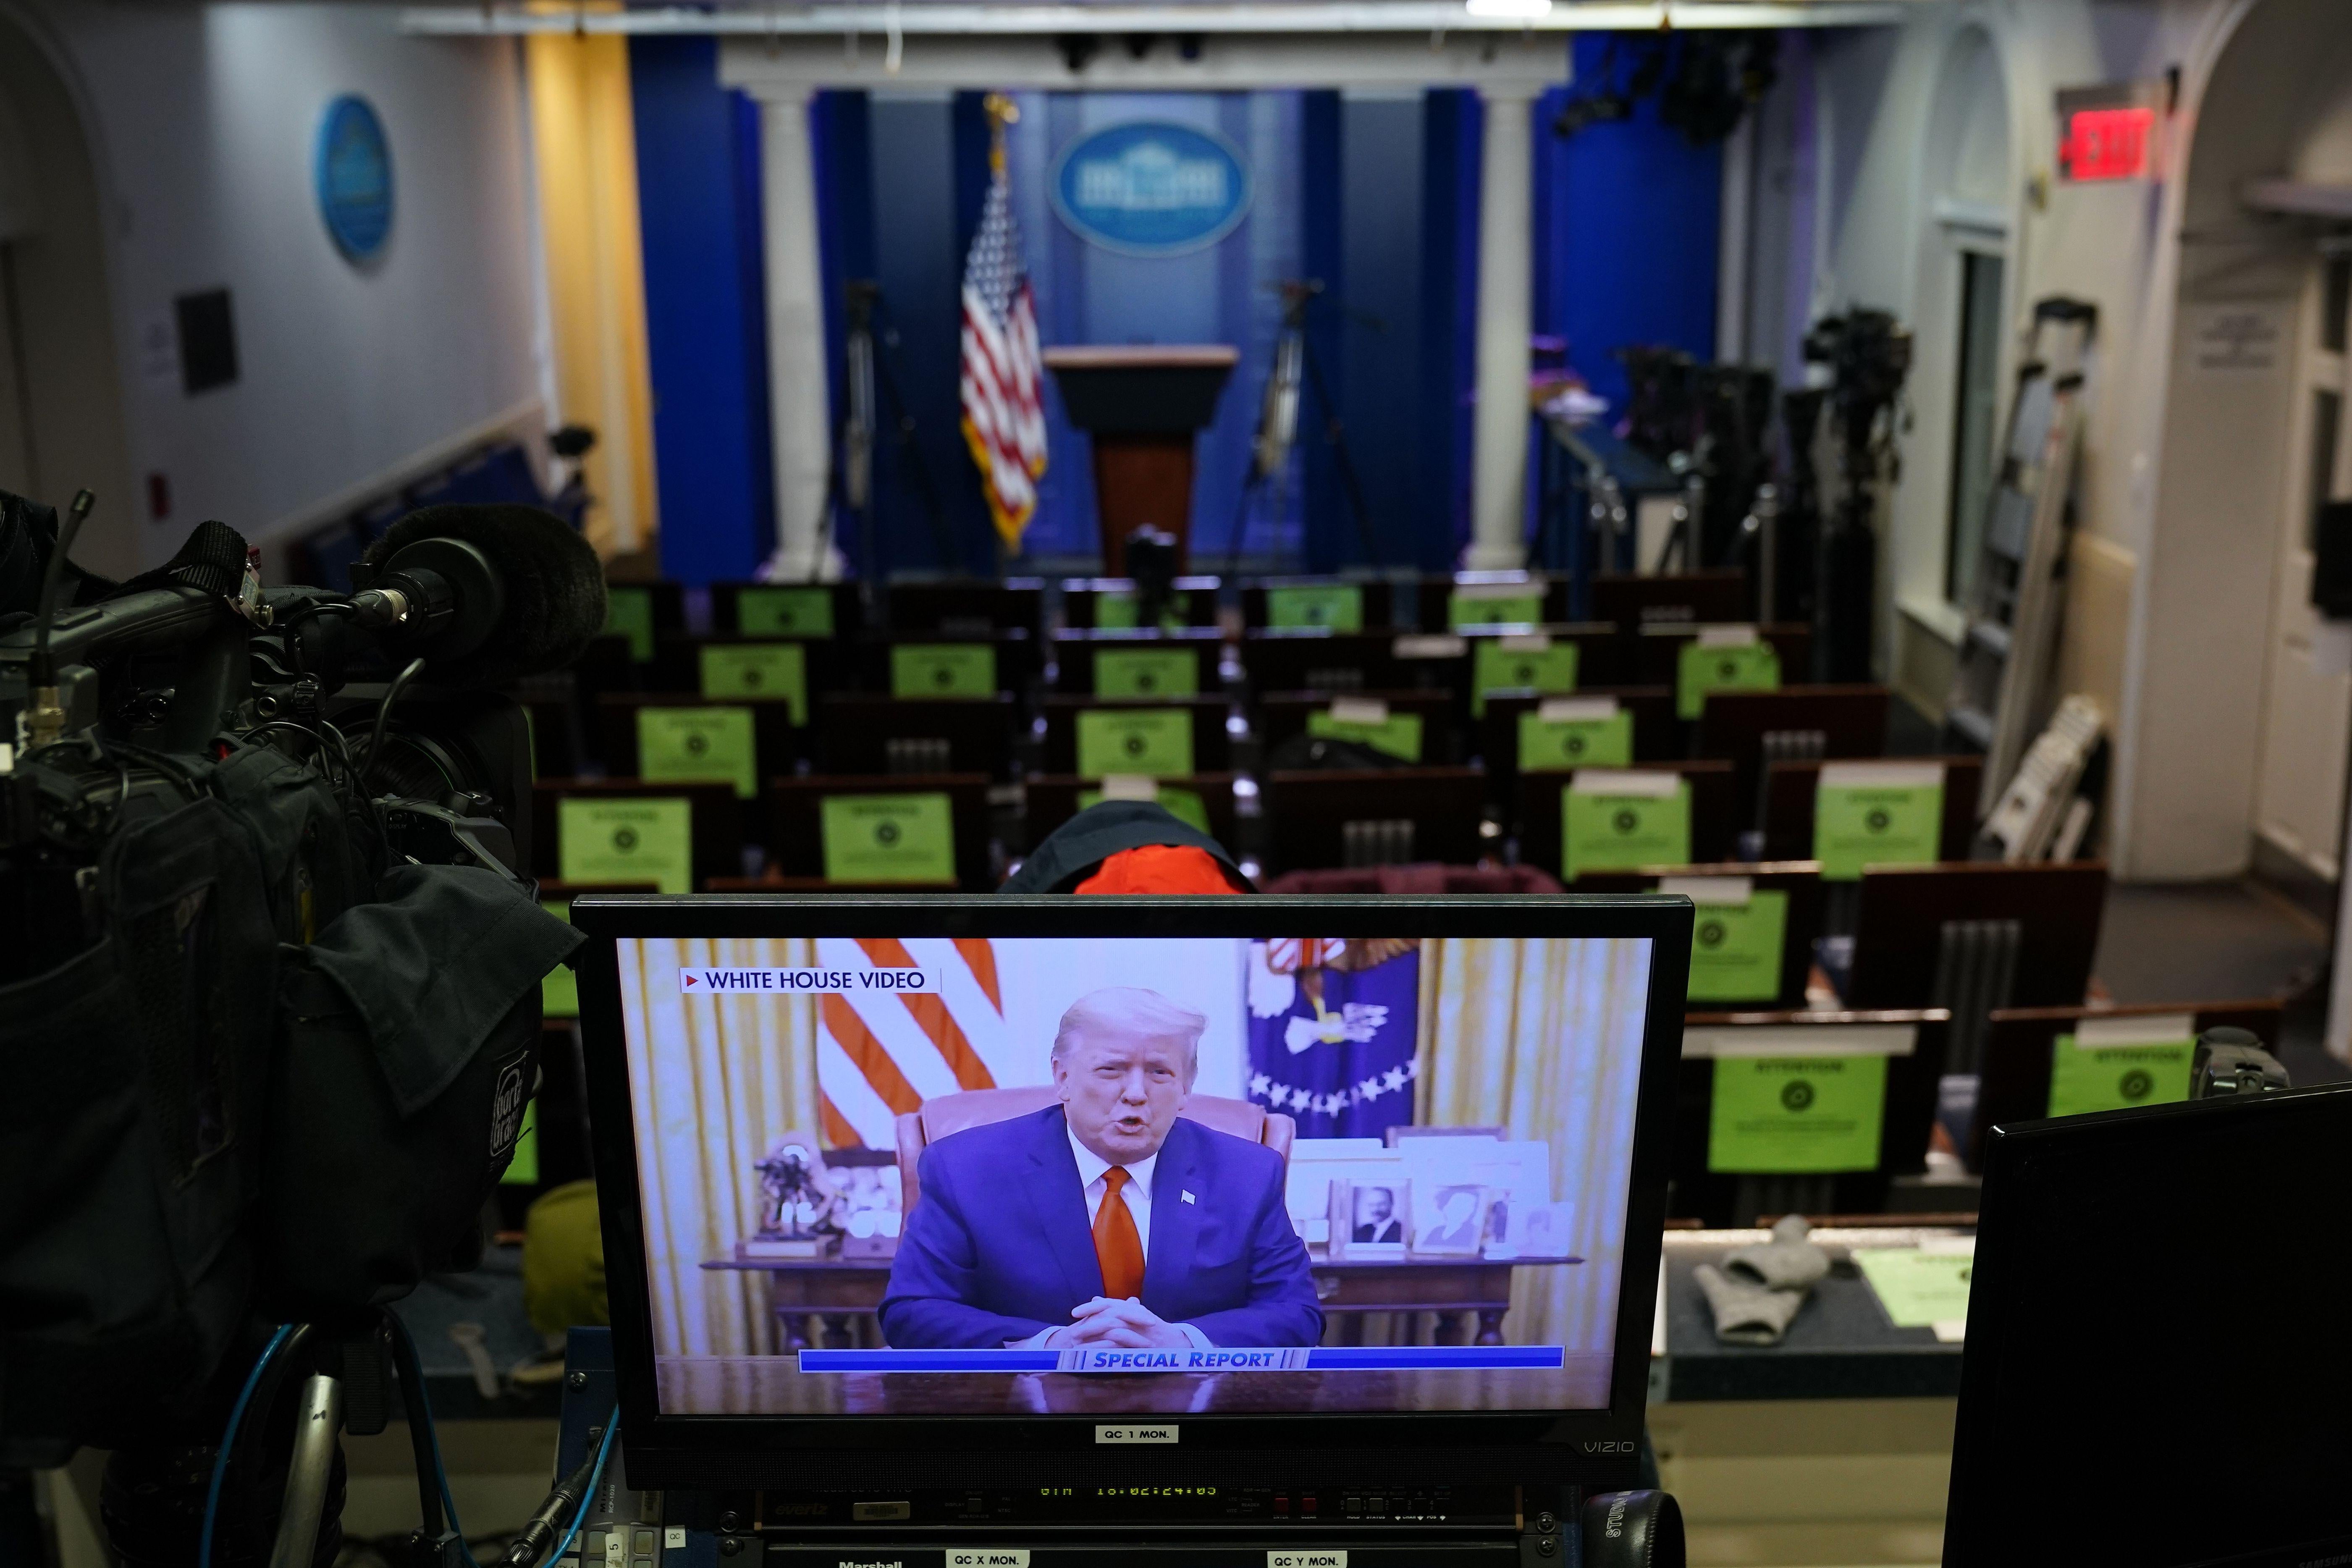 An image on a monitor shows President Donald Trump speaking during in a video posted on the White House Twitter feed, in the empty Brady Briefing Room of the White House in Washington, D.C. on January 13, 2021. 